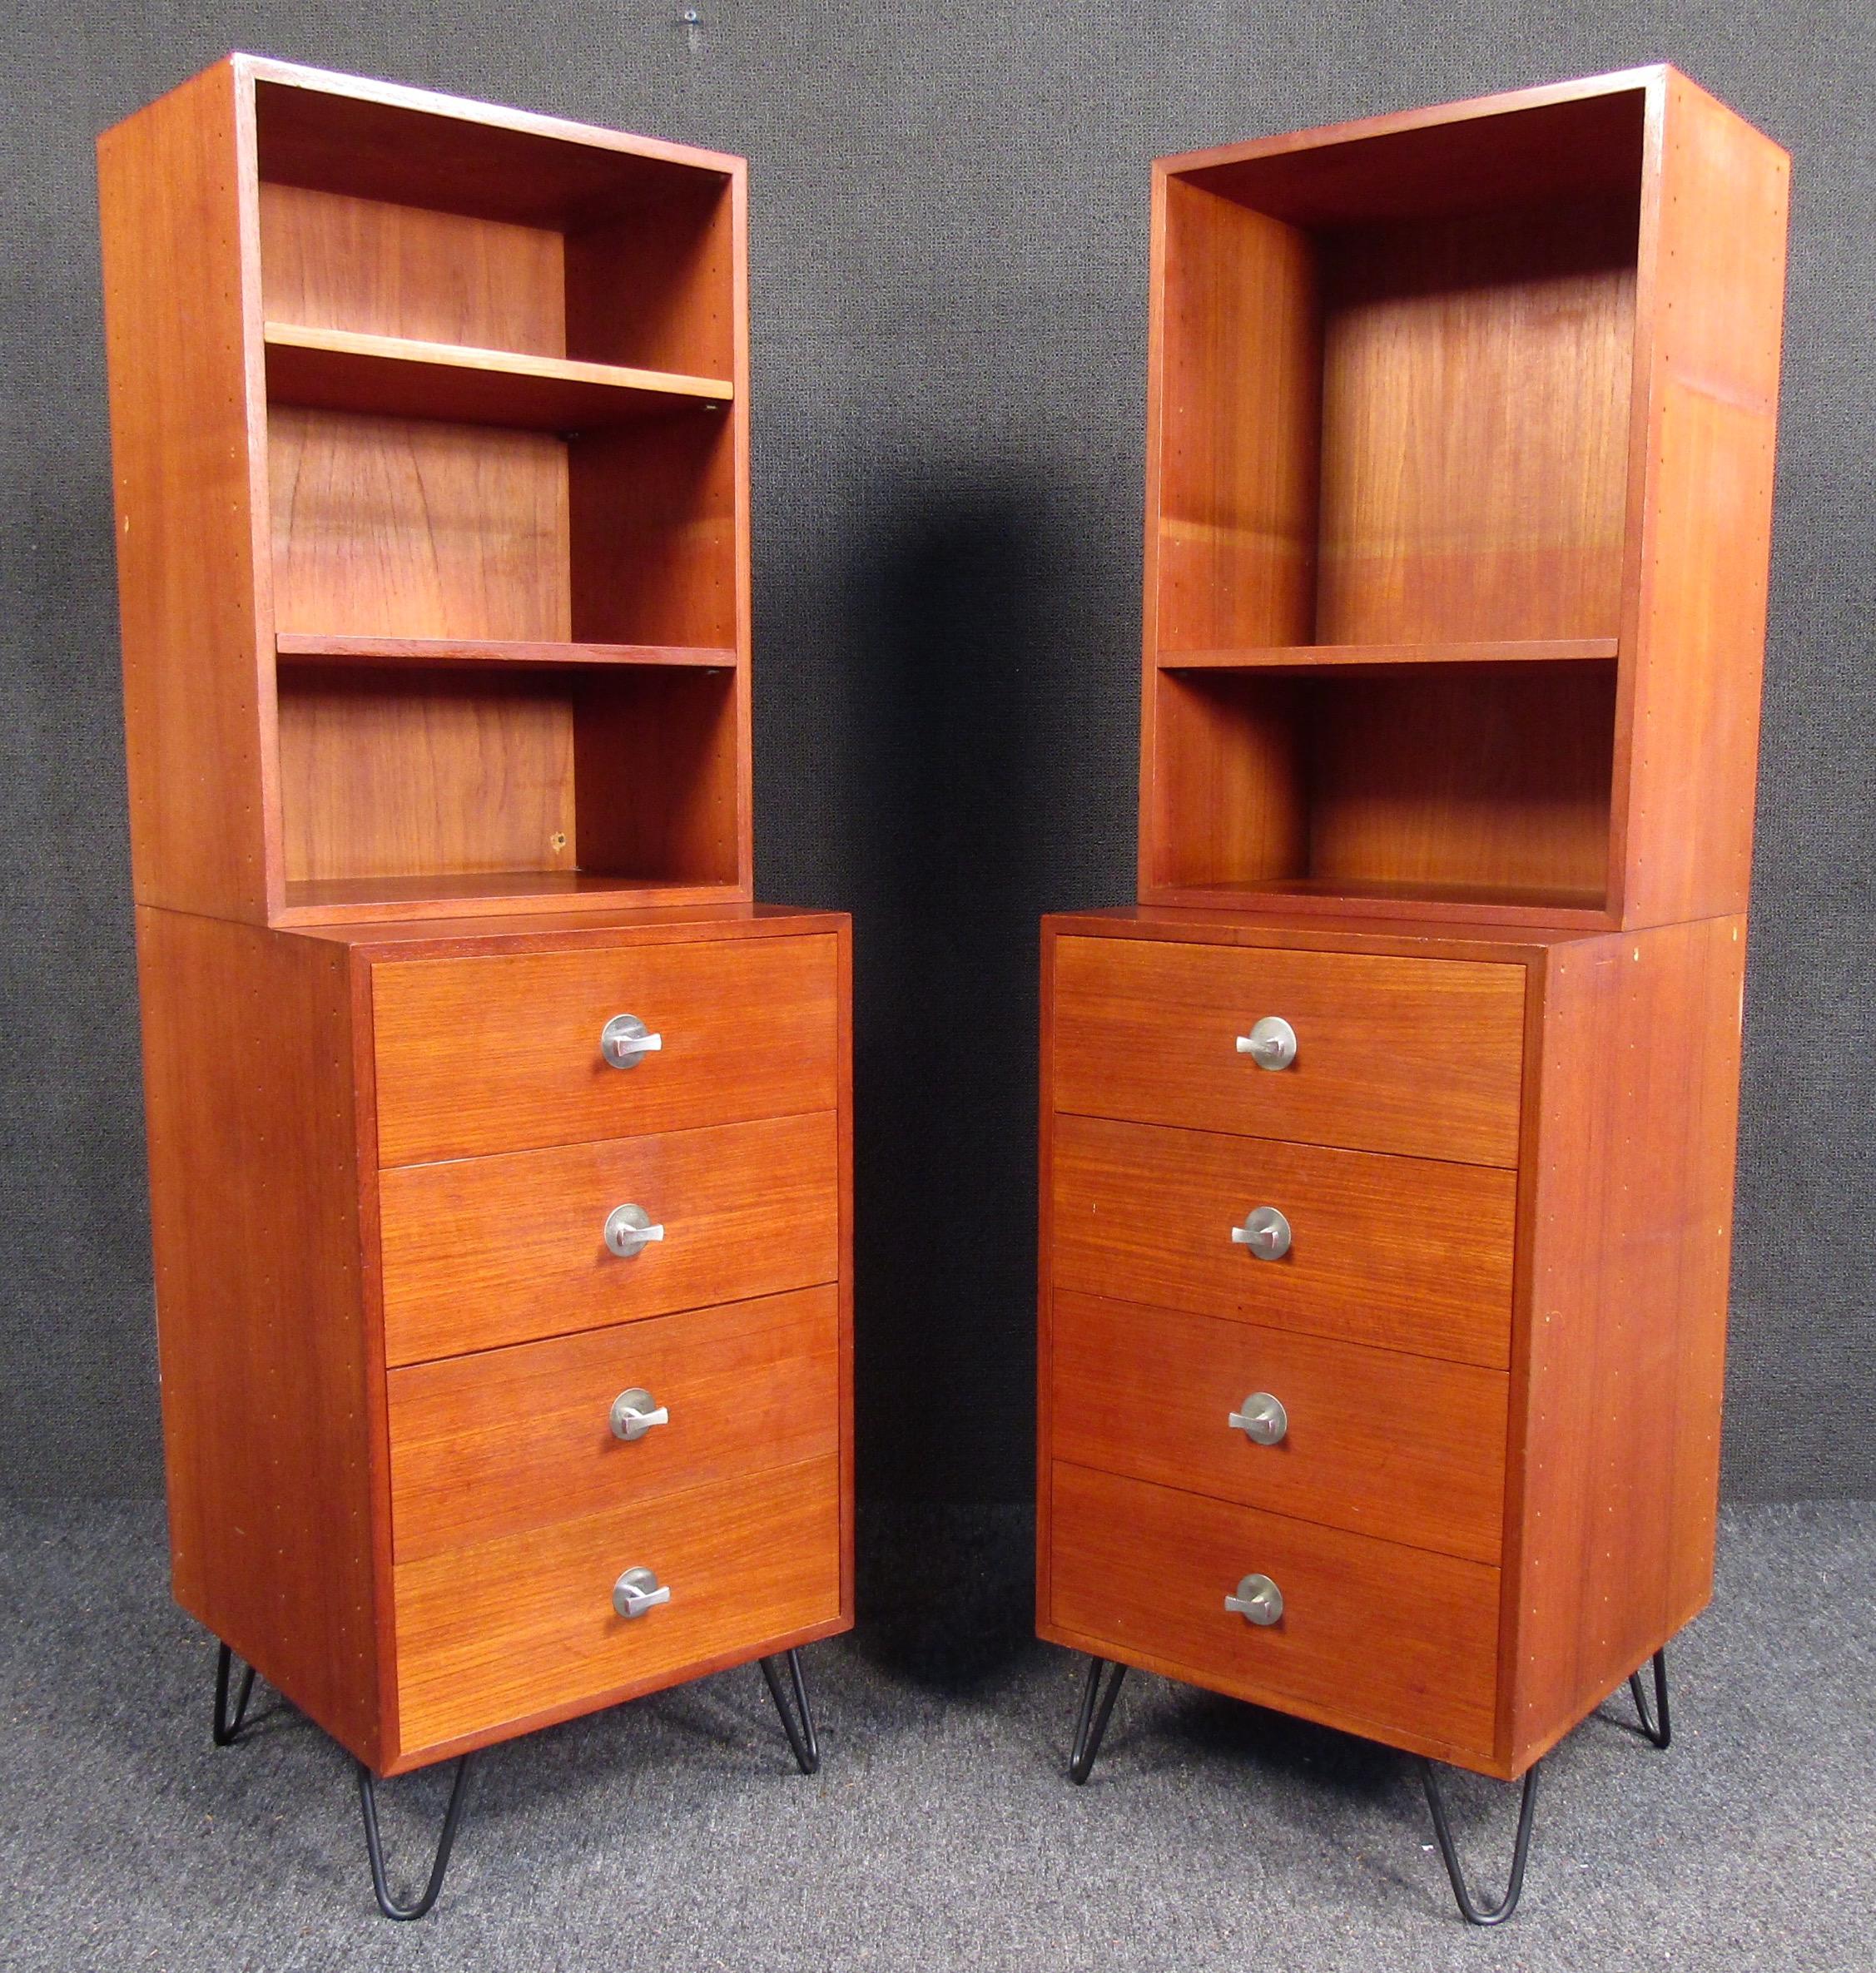 A stunning pair of Mid-Century modern cabinets. They boast a rich teak grain, finished back, and metal pulls. With display shelves and plenty of storage, it is perfect for any office/home/studio setting.

Please confirm pickup location (NY/NJ).